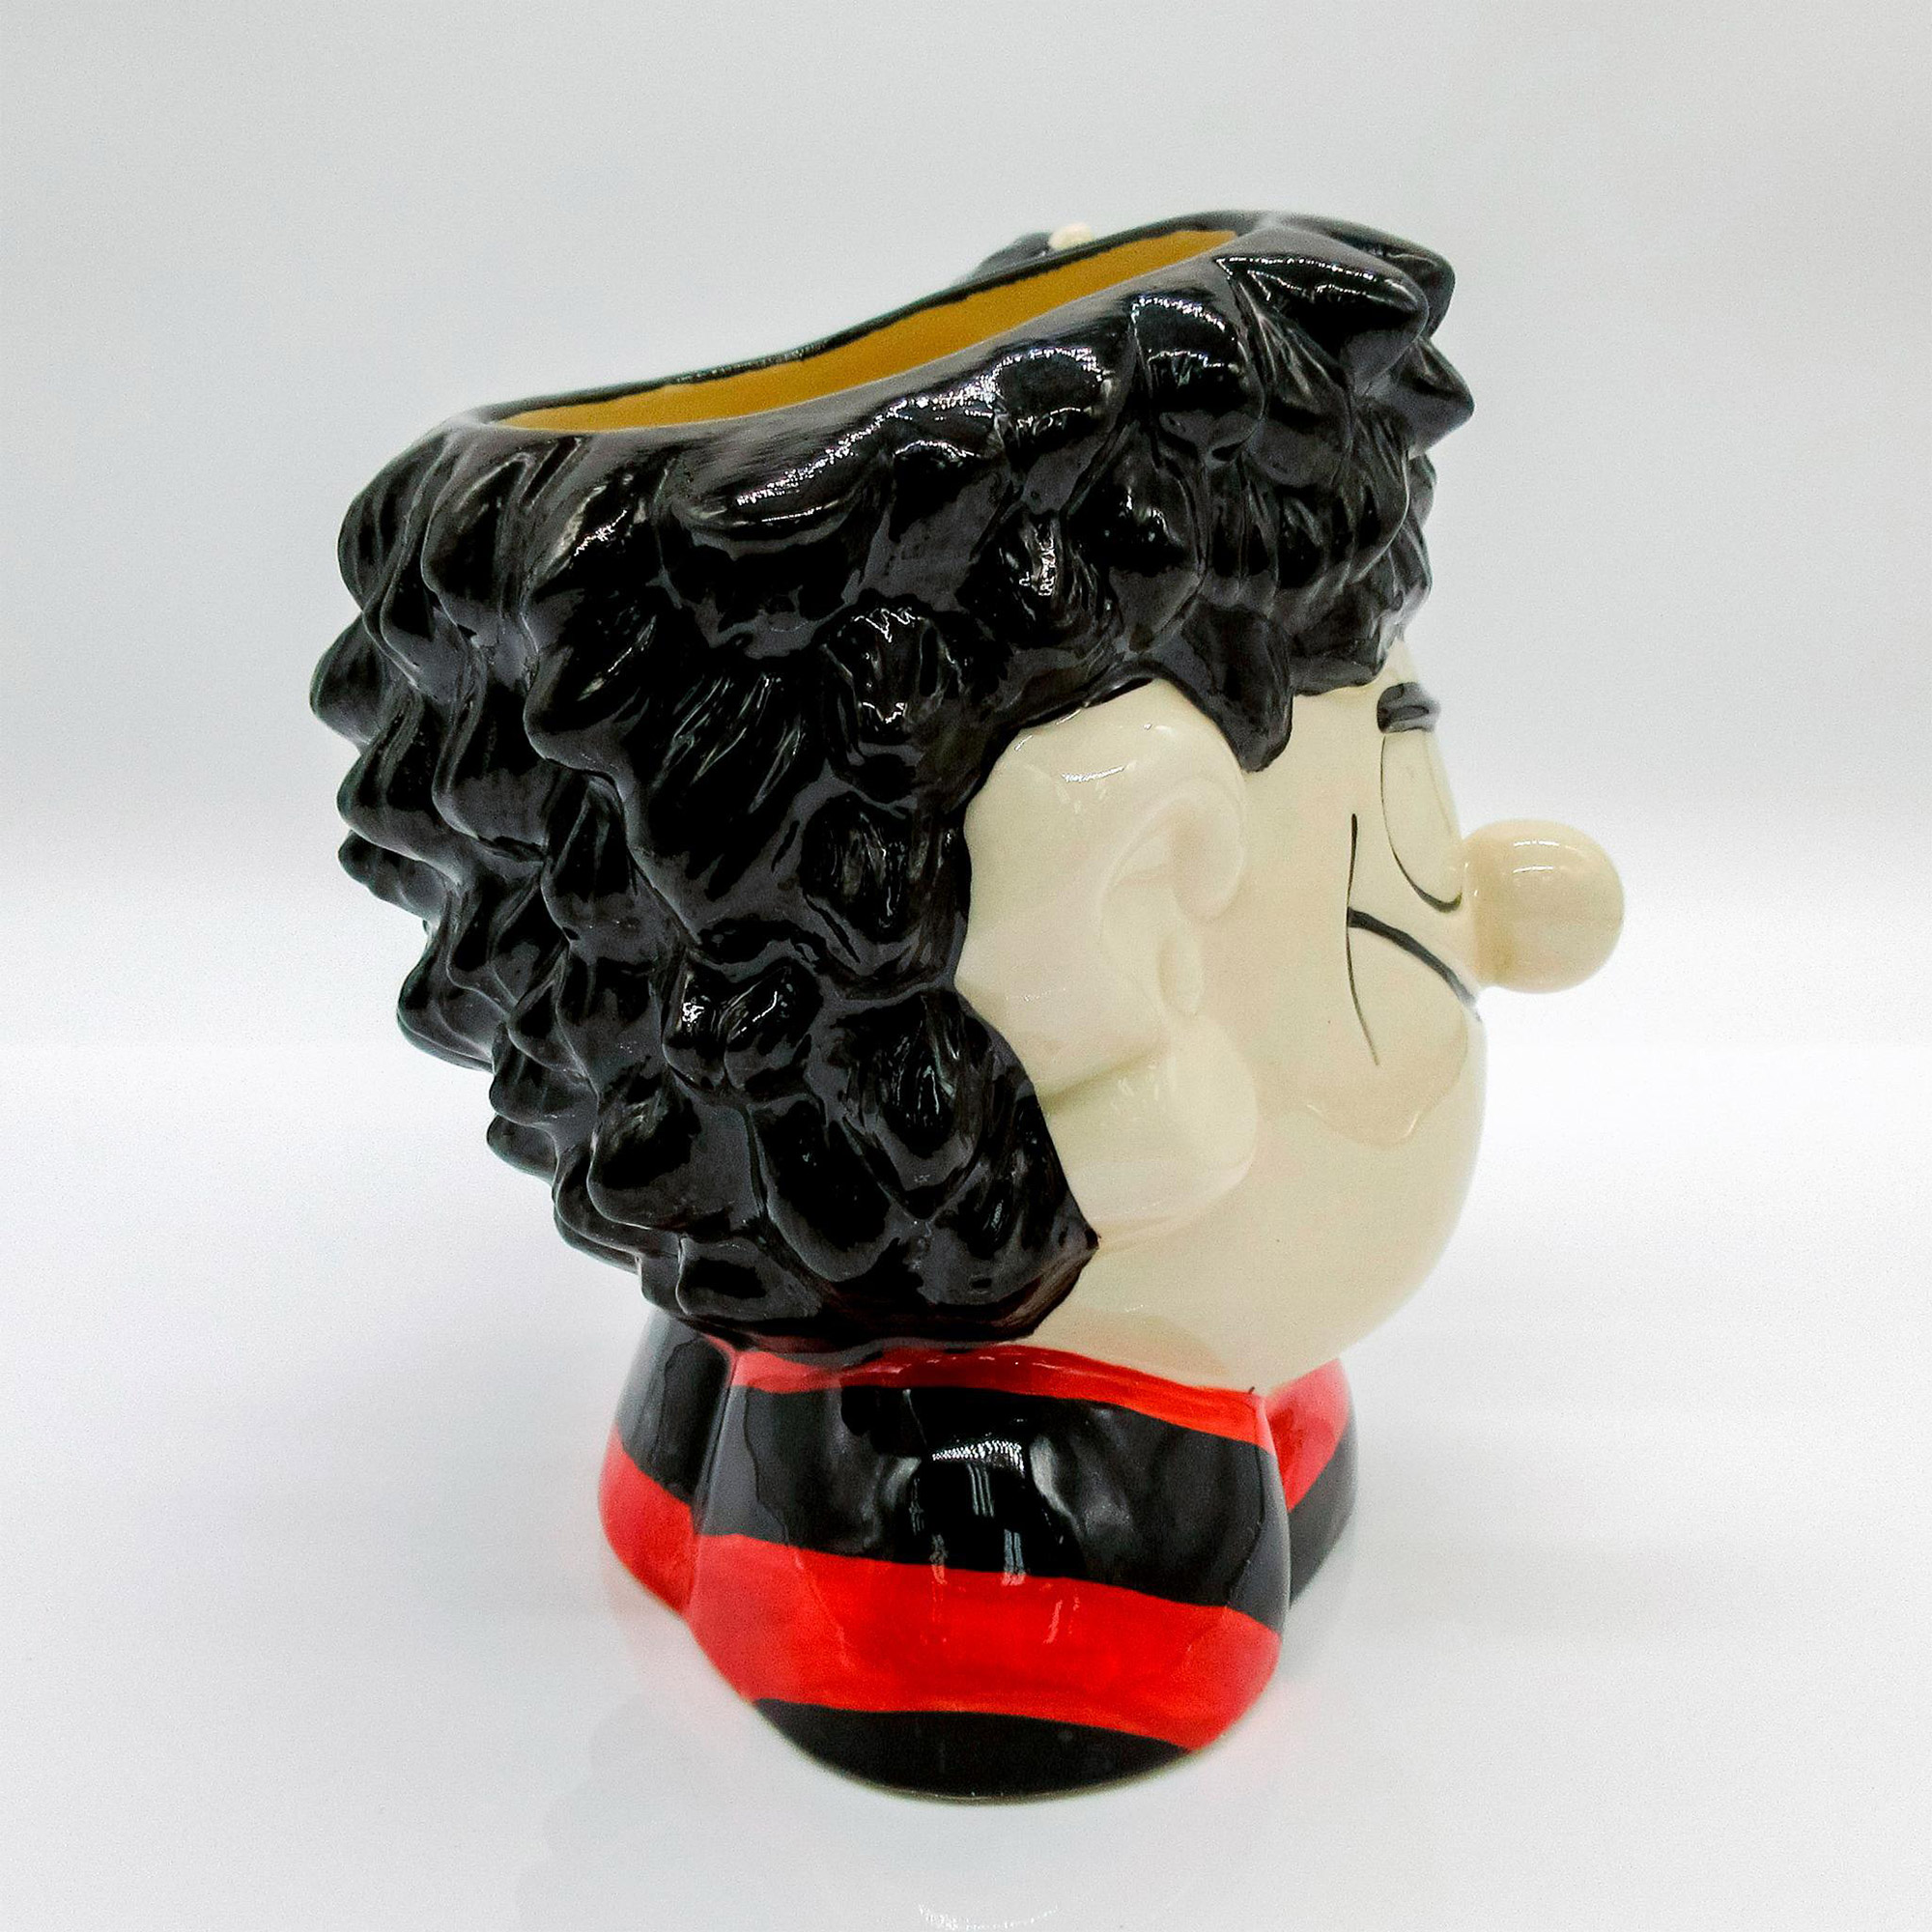 Dennis and Gnasher D7005 - Large - Royal Doulton Character Jug - Image 4 of 5